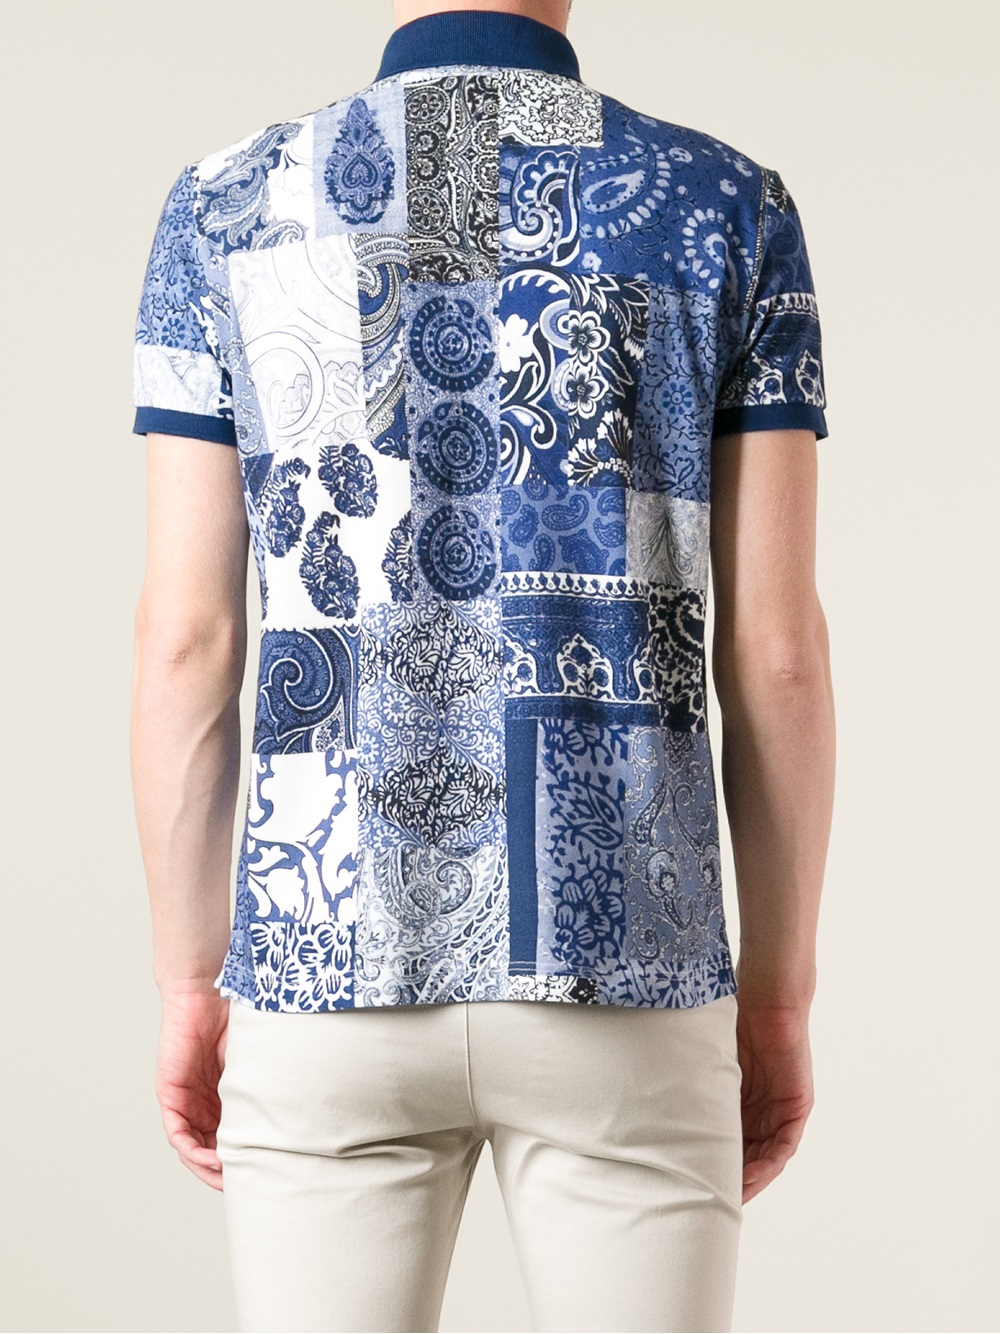 Lyst - Etro Patchwork Print Polo Shirt in Blue for Men